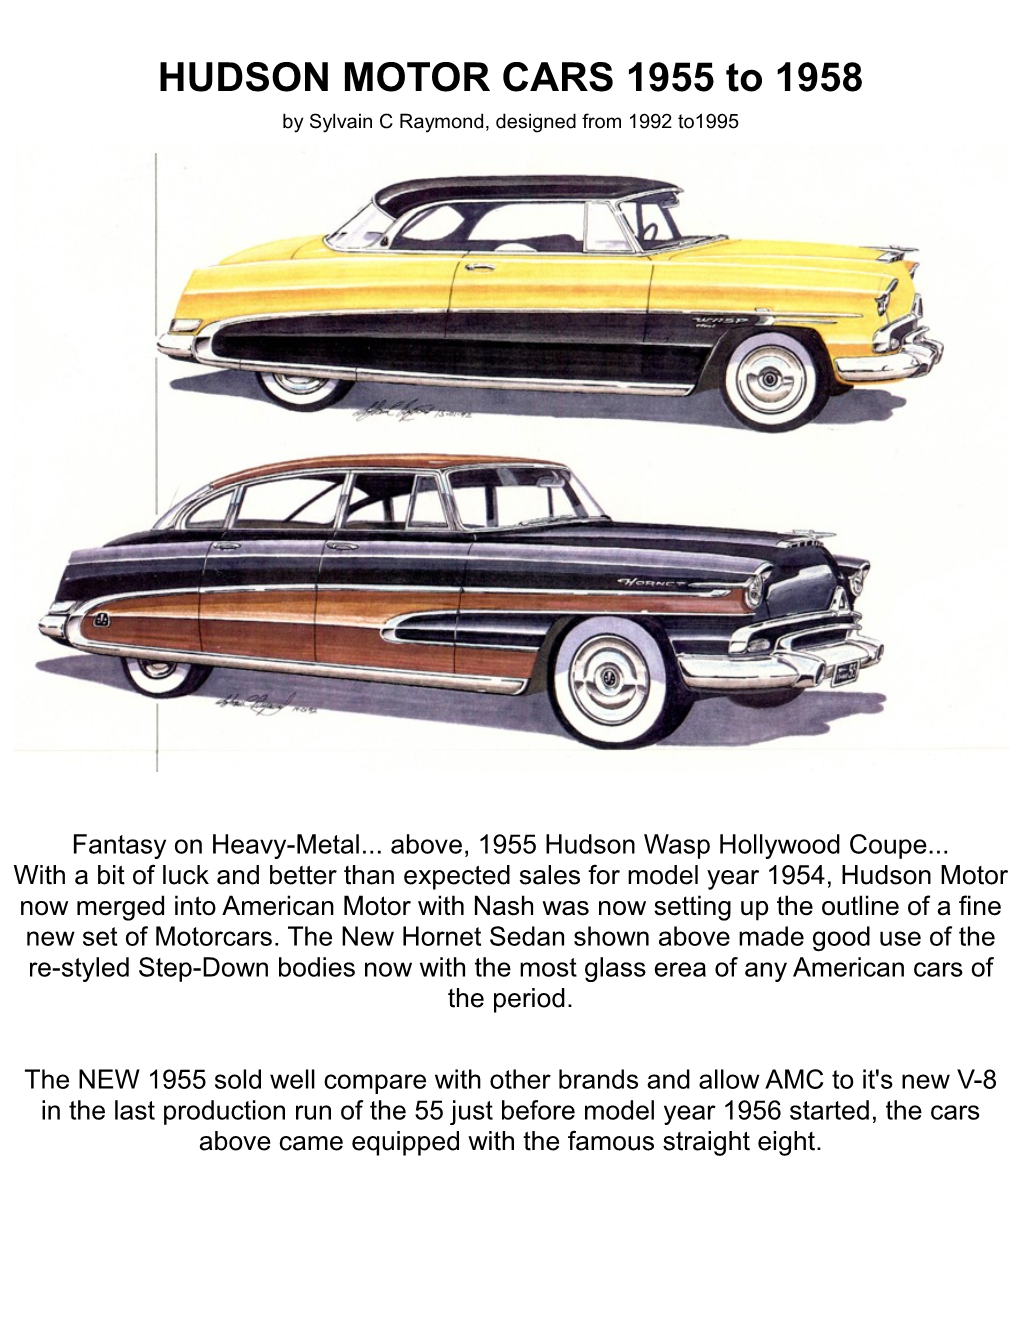 HUDSON MOTOR CARS 1955 to 1958 by Sylvain C Raymond, Designed from 1992 To1995